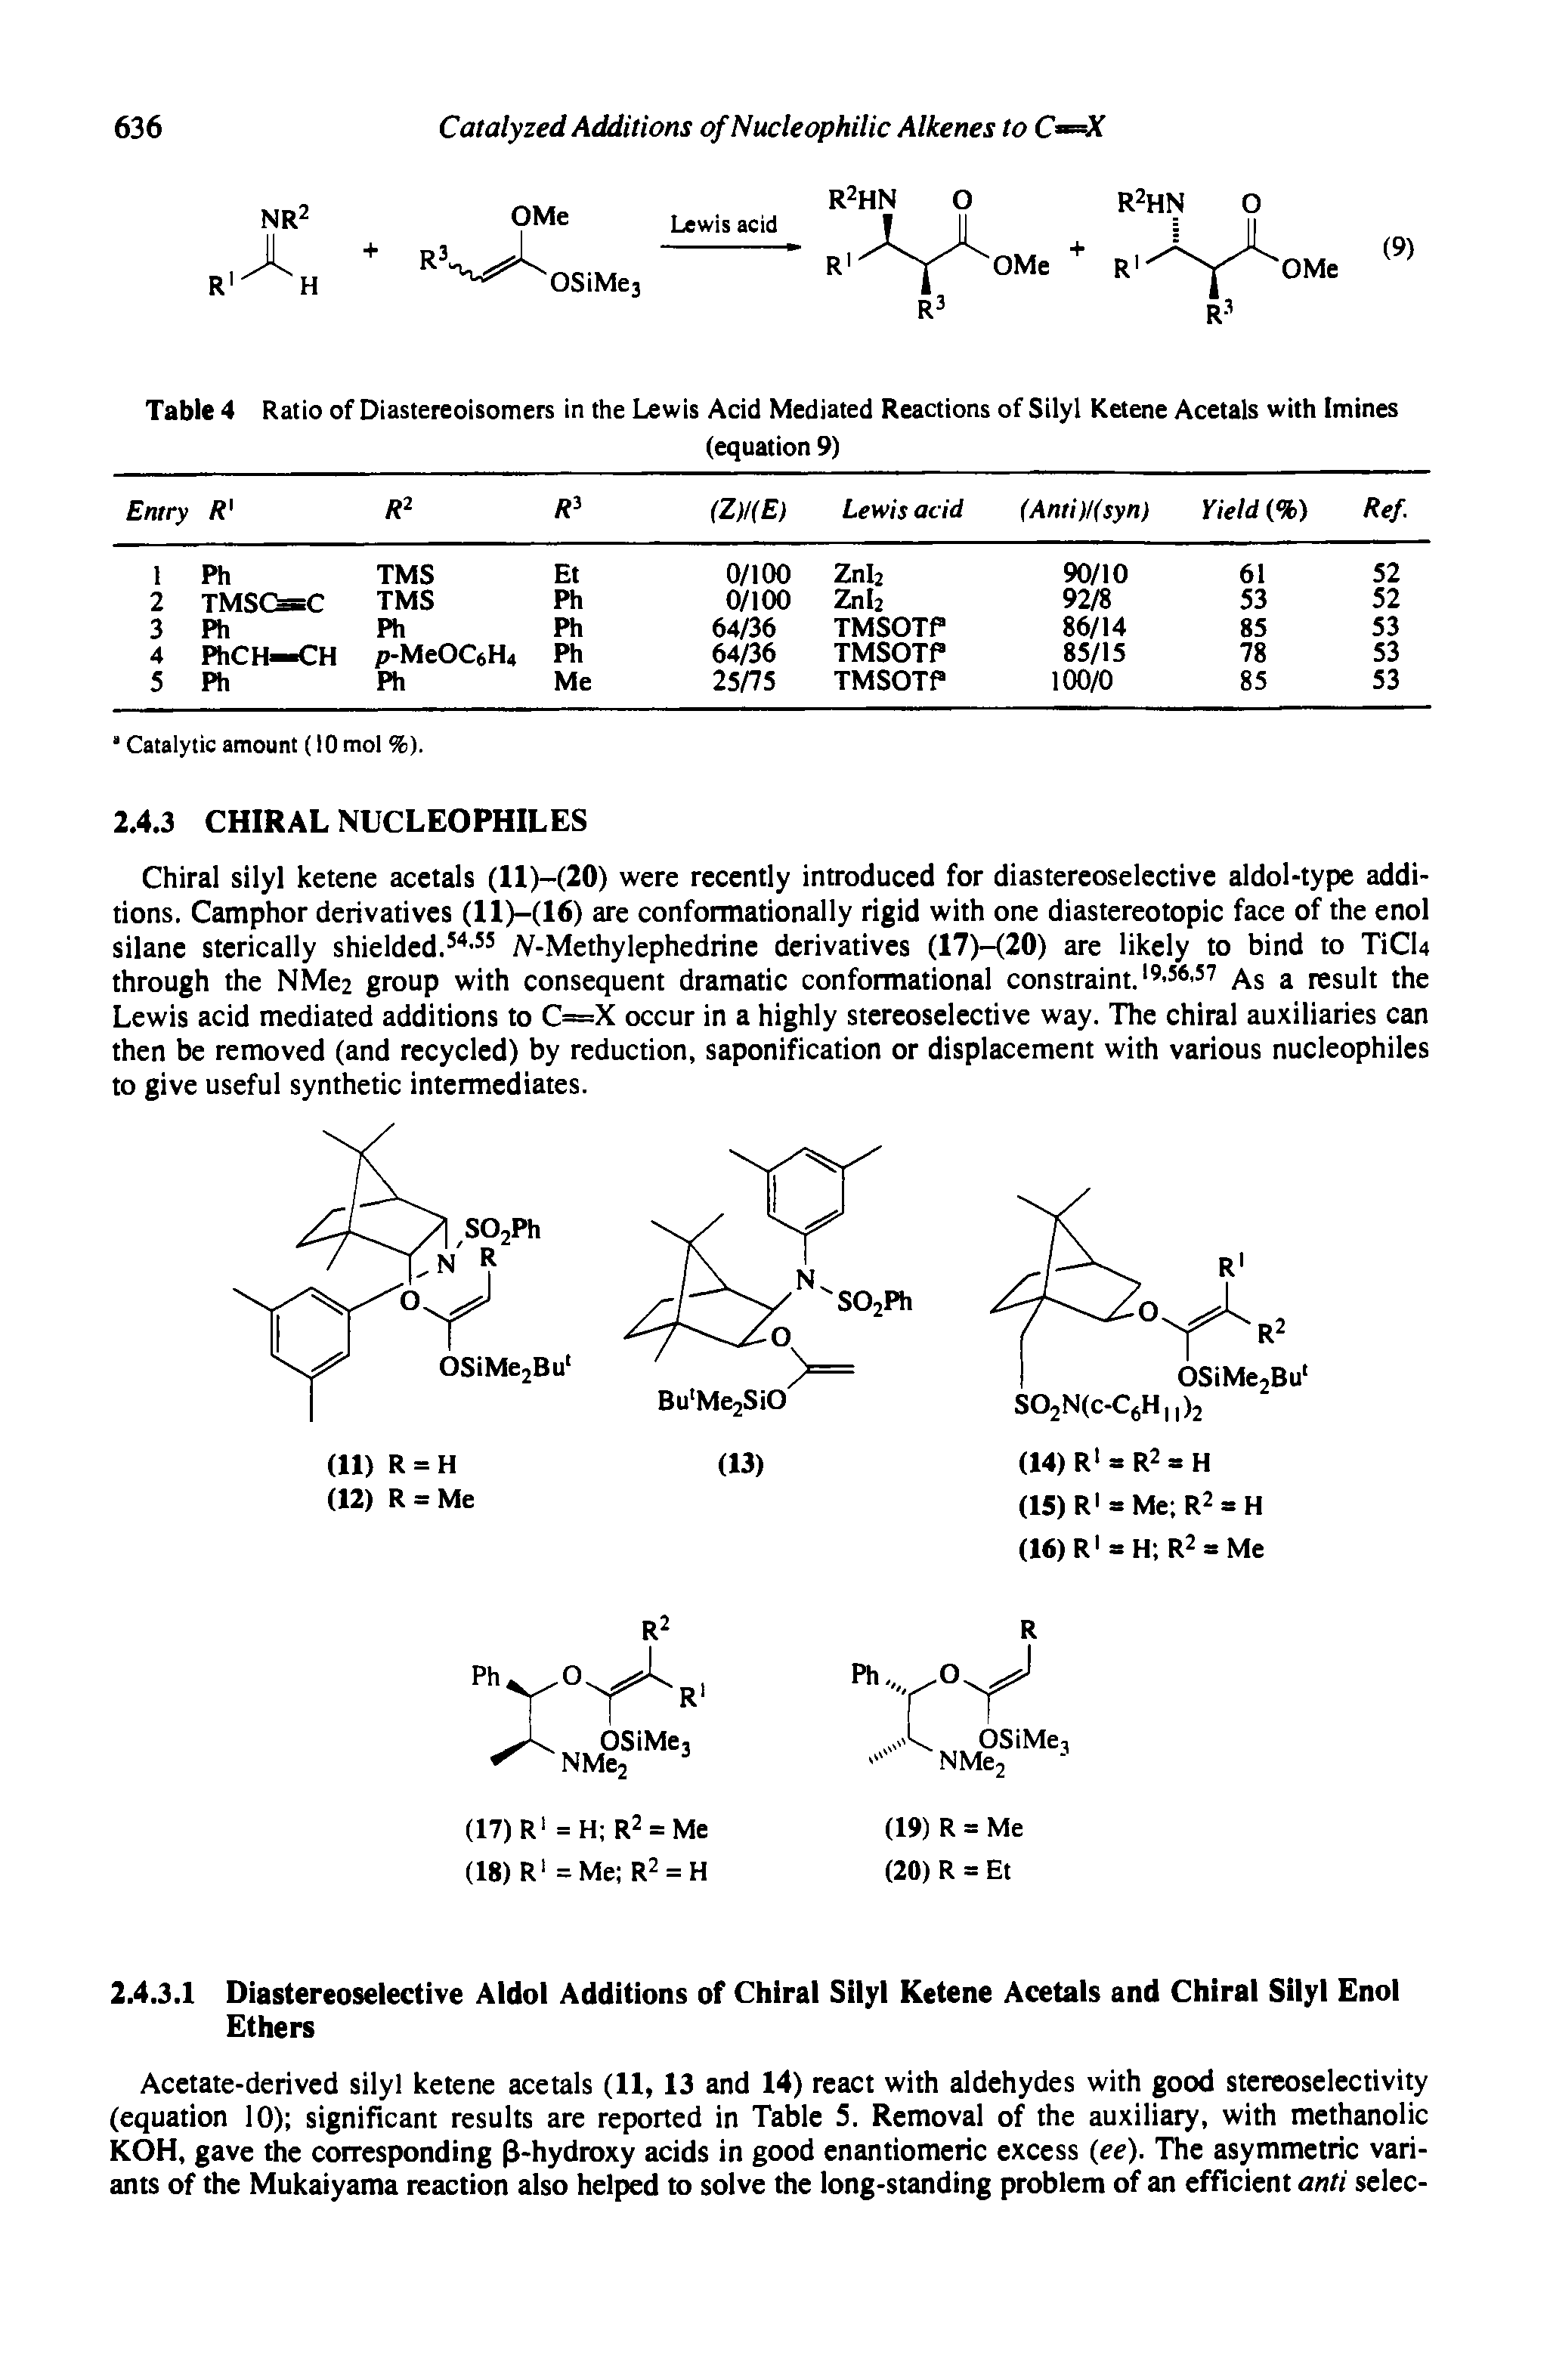 Table 4 Ratio of Diastereoisomers in the Lewis Acid Mediated Reactions of Silyl Ketene Acetals with (mines...